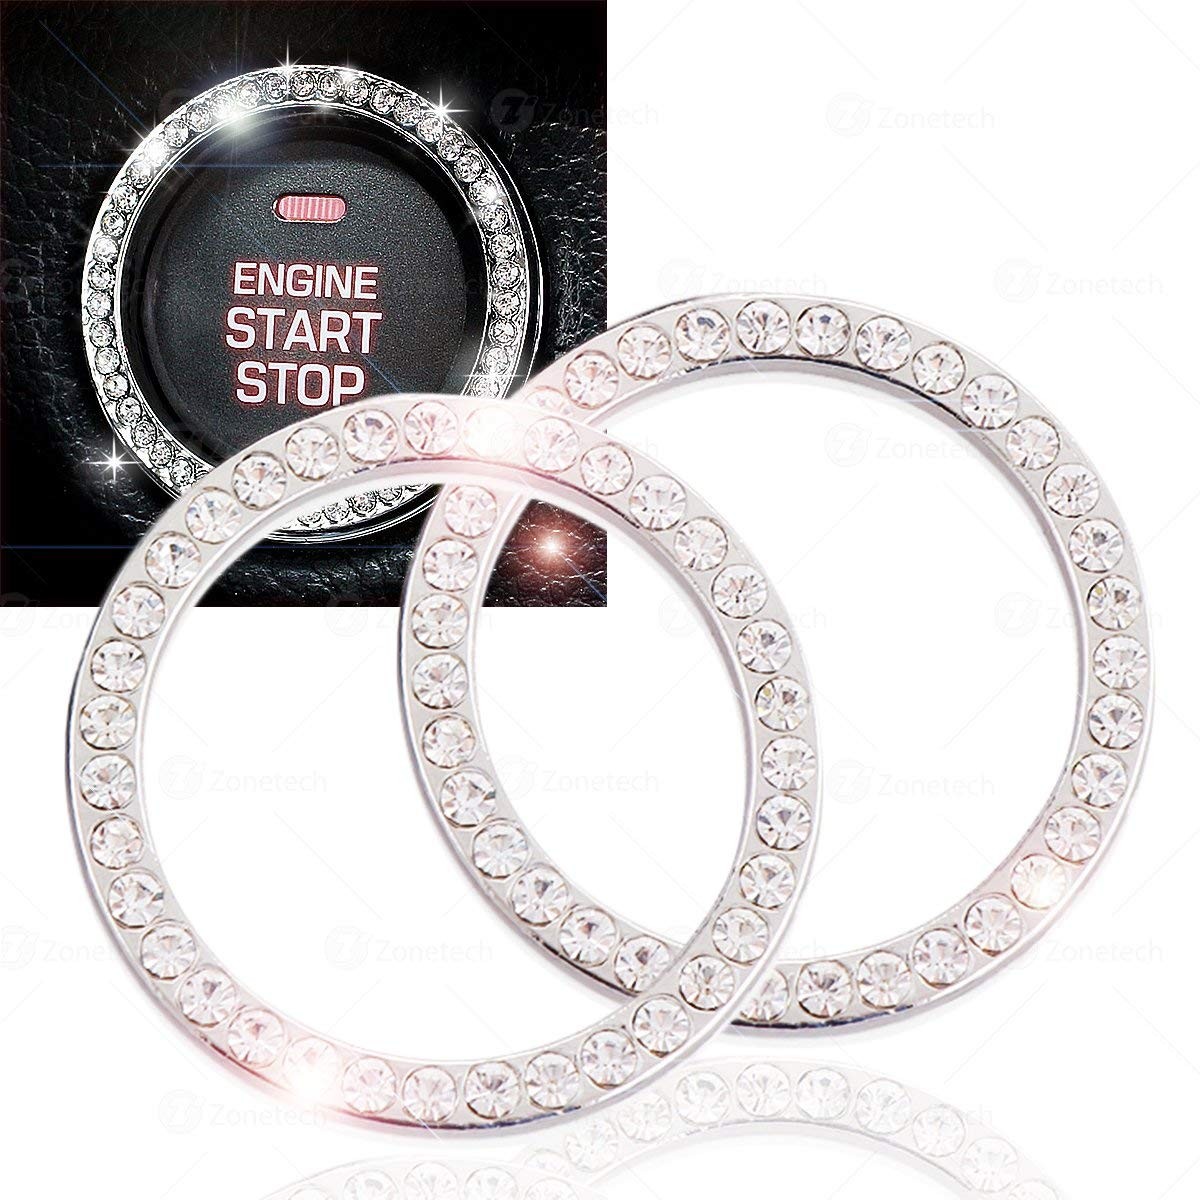 2 PCS Crystal Rhinestone Car Engine Start Stop Decoration Ring,Bling Car Accessories for Women Key Ignition Starter & Knob Bling Ring Push to Start Button Red 